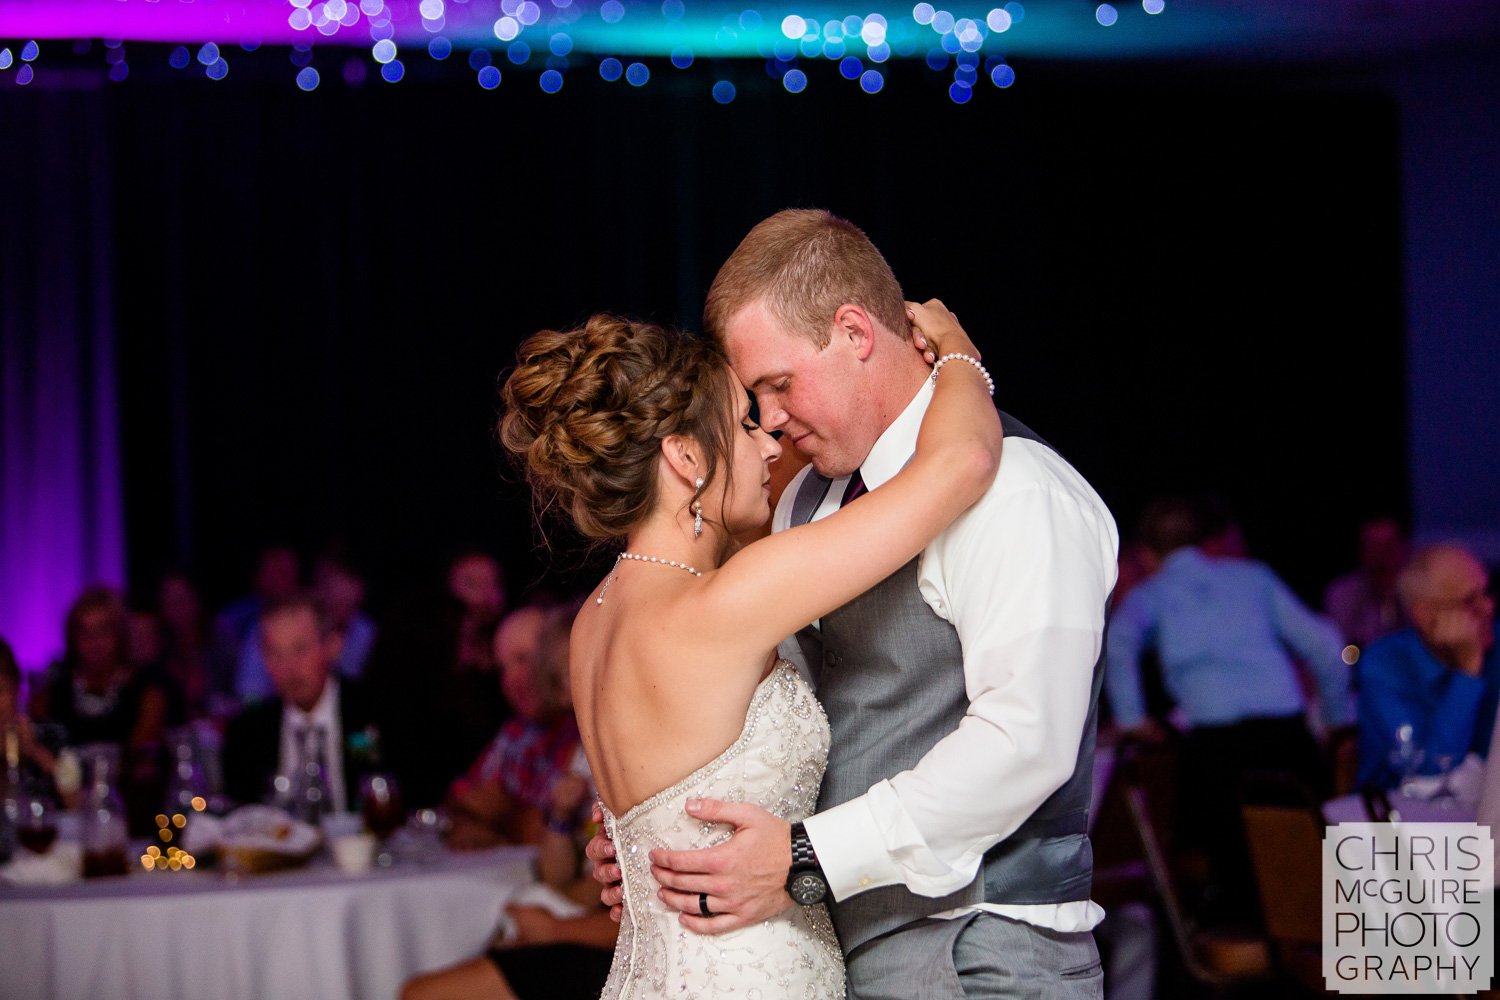 First Dance at Countryside Banquets Washington IL wedding